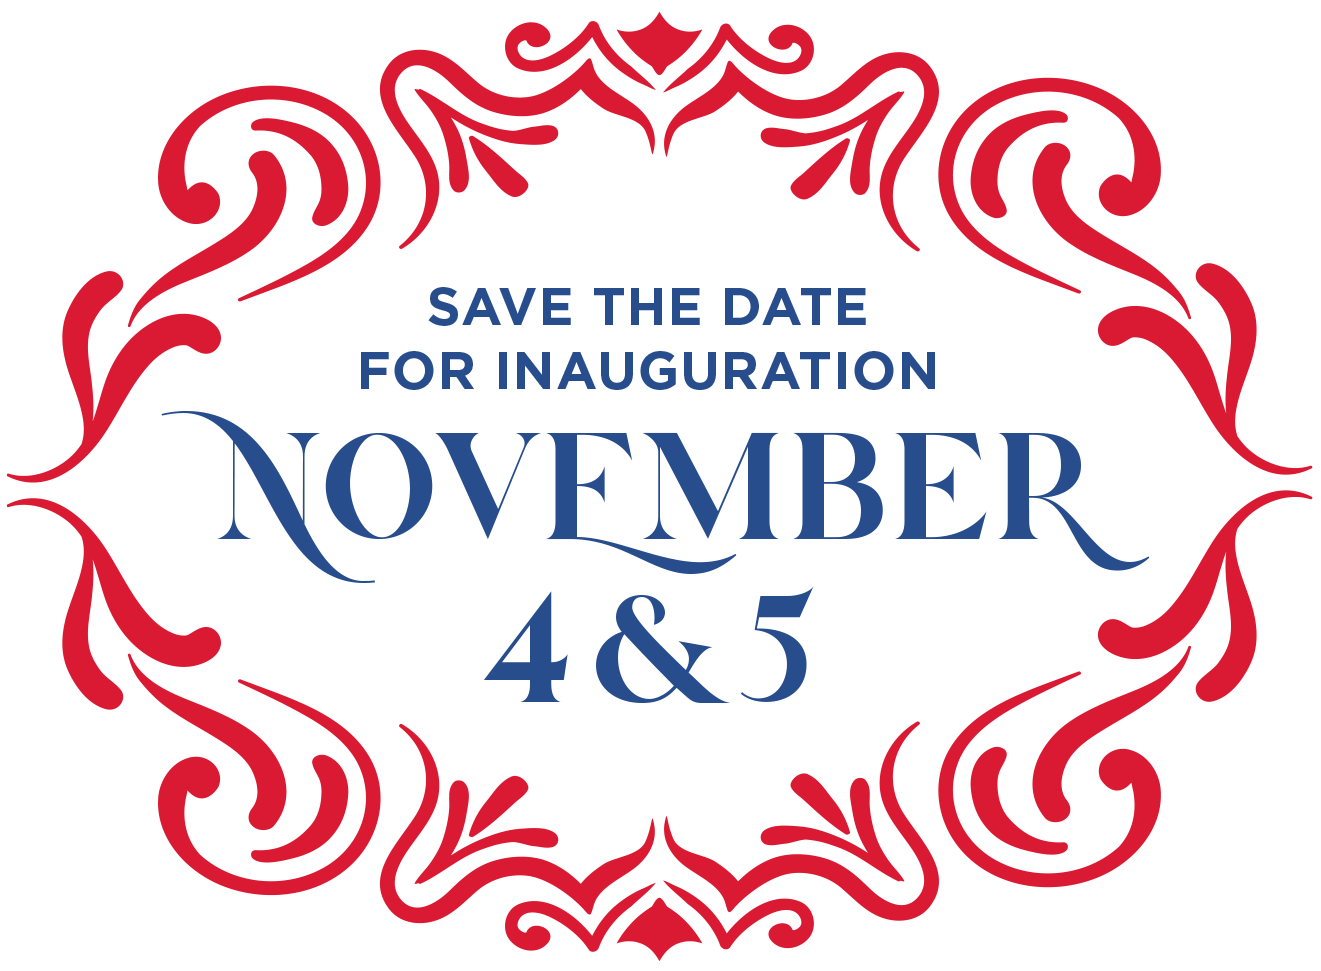 Save the Date for the Inauguration, November 4 & 5